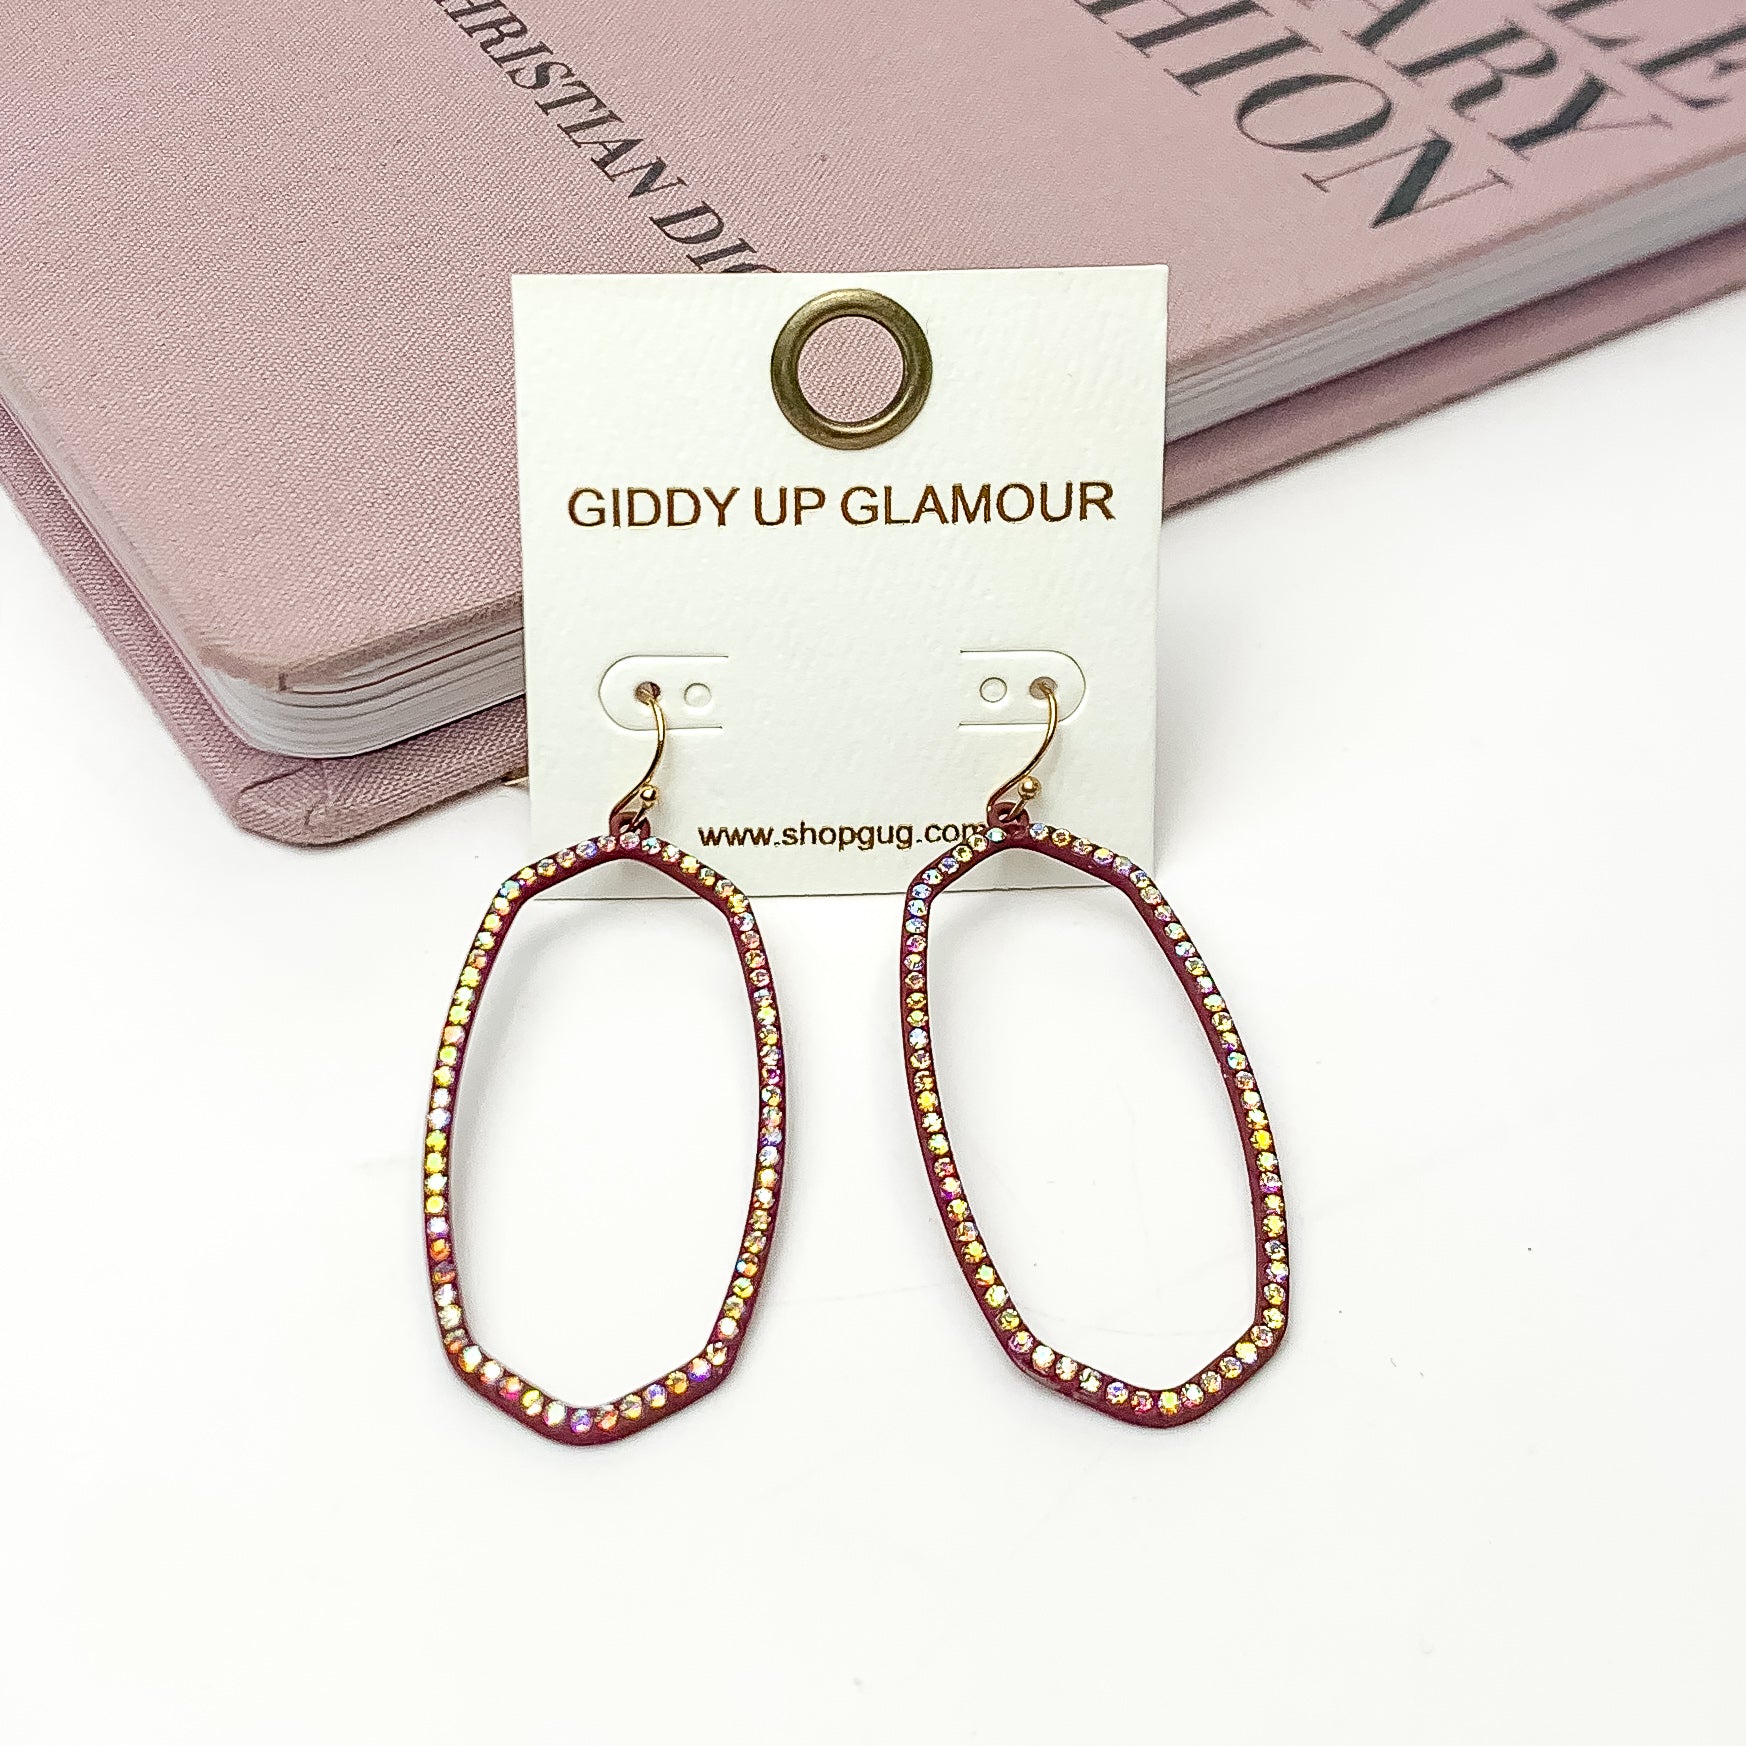 Sparkle Girl Open Oval Earrings in Maroon. These earrings are pictured laying against a pink book with a white background.